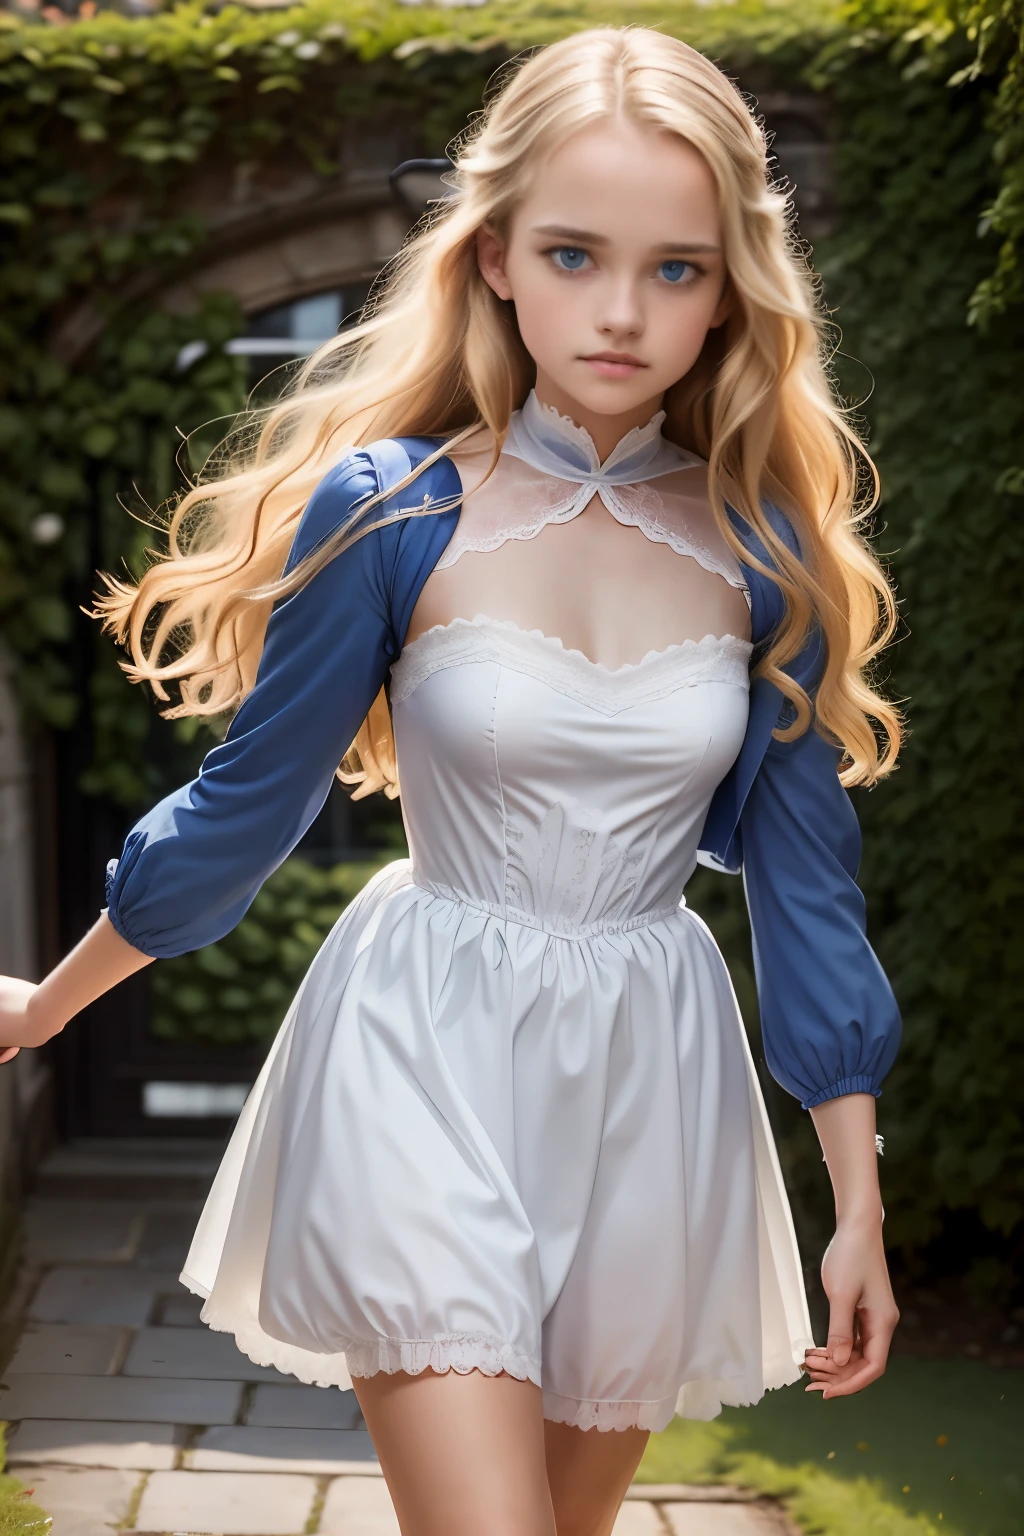 Virginia Otis, 15 years old (blond hair, blue eyes), thin, cute face, walks at night in Canterville Castle (inspired by the novel The Canterville Ghost). aged 1887, Victorian dark fantasy